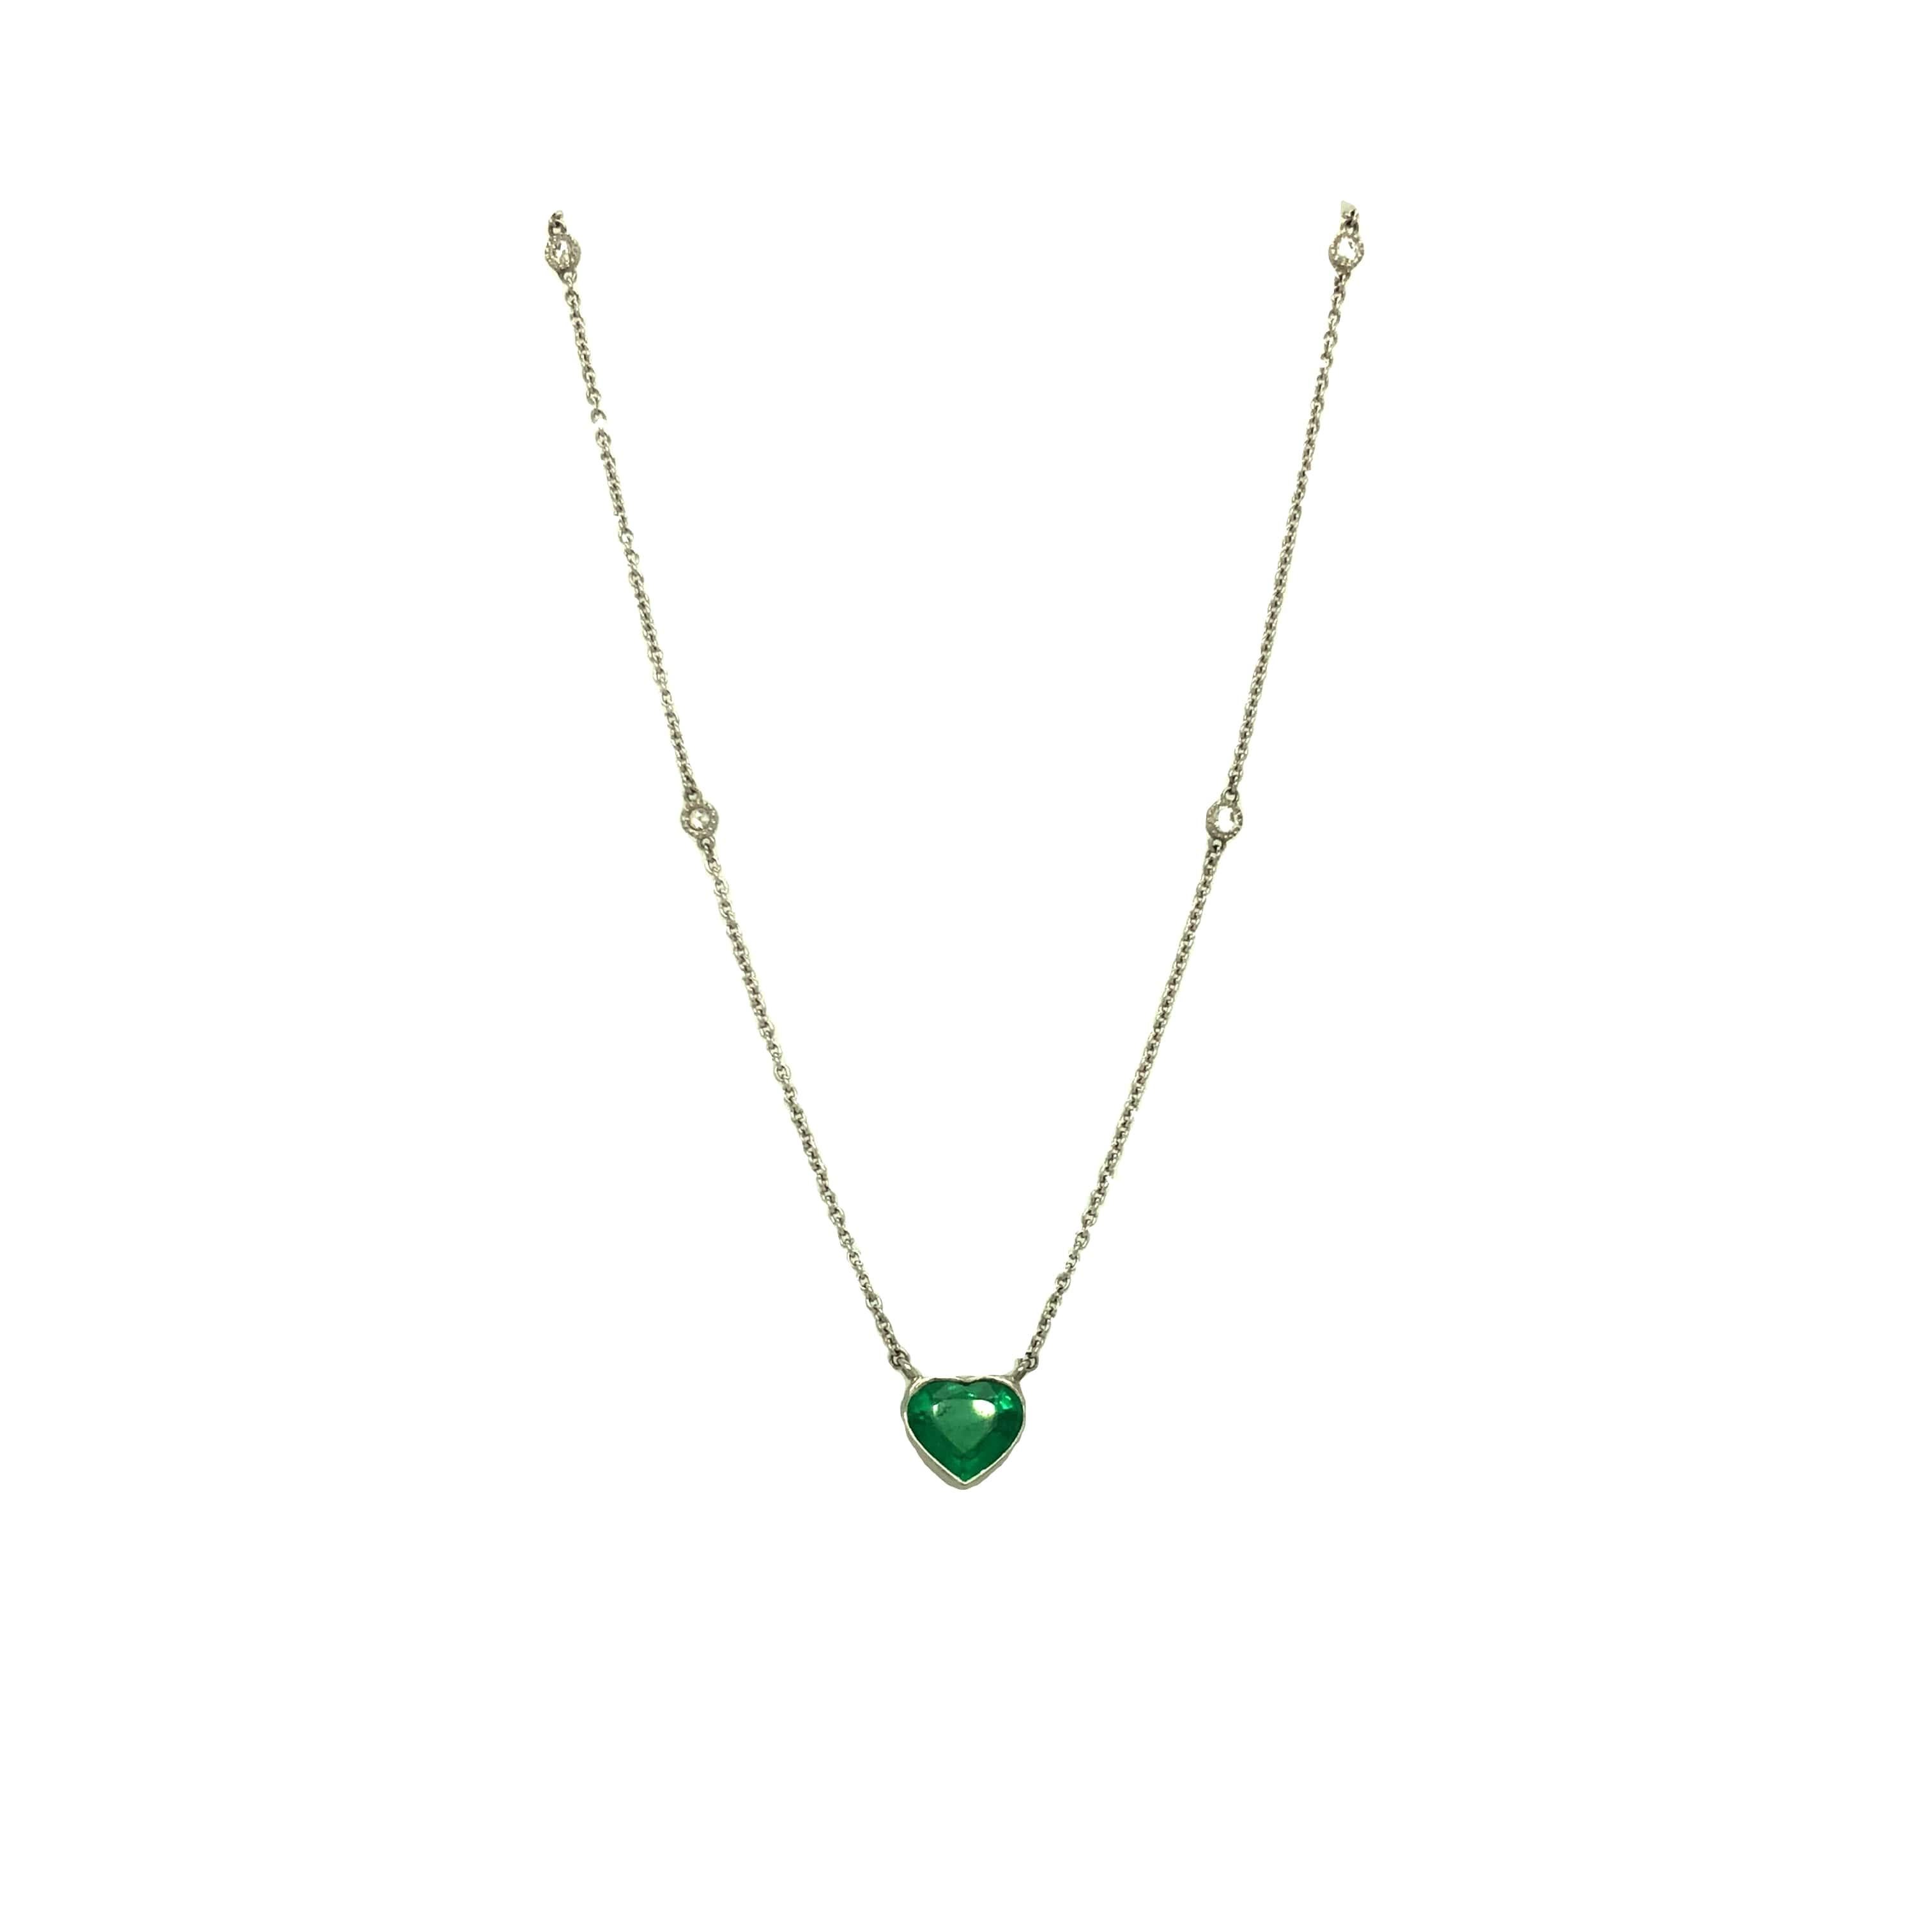 Gems Are Forever 1.18 Carat Heart Shaped Emerald and Diamond Platinum Necklace For Sale 2